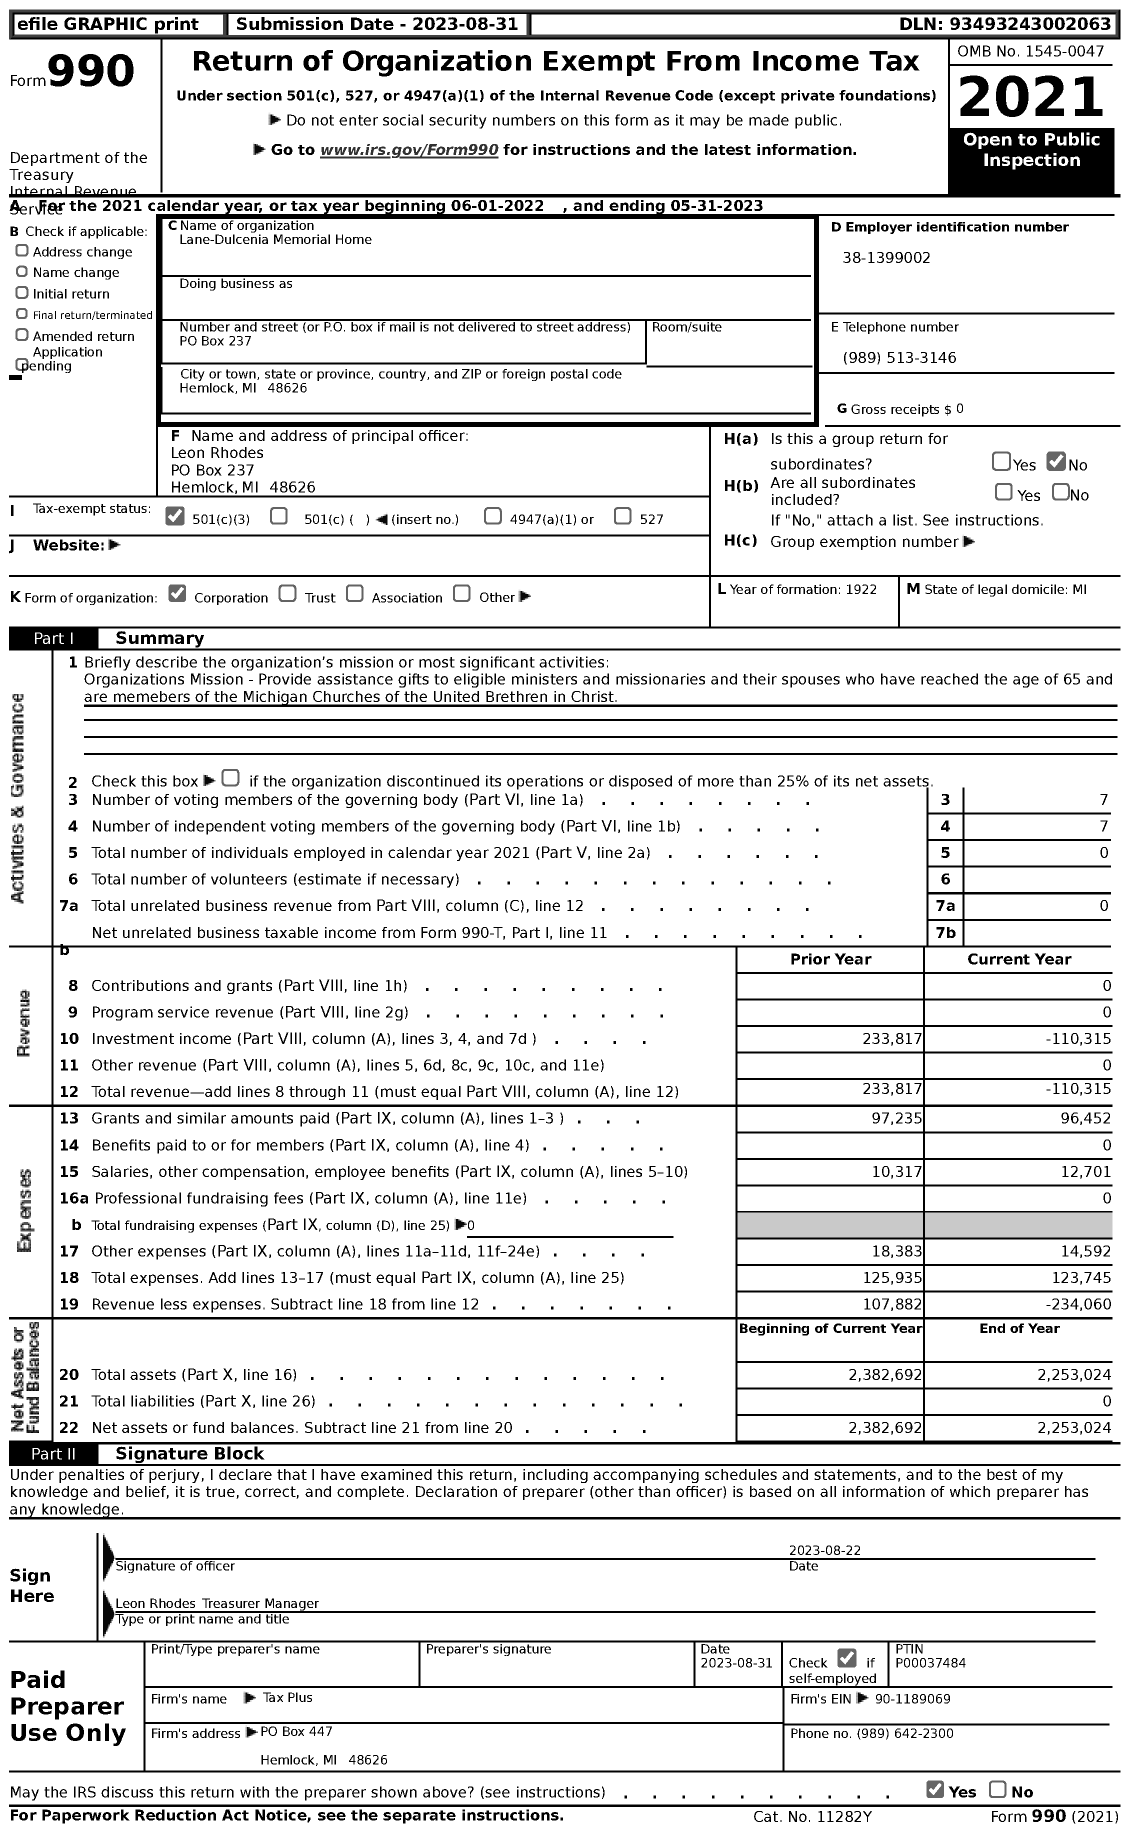 Image of first page of 2022 Form 990 for Lane-Dulcenia Memorial Home